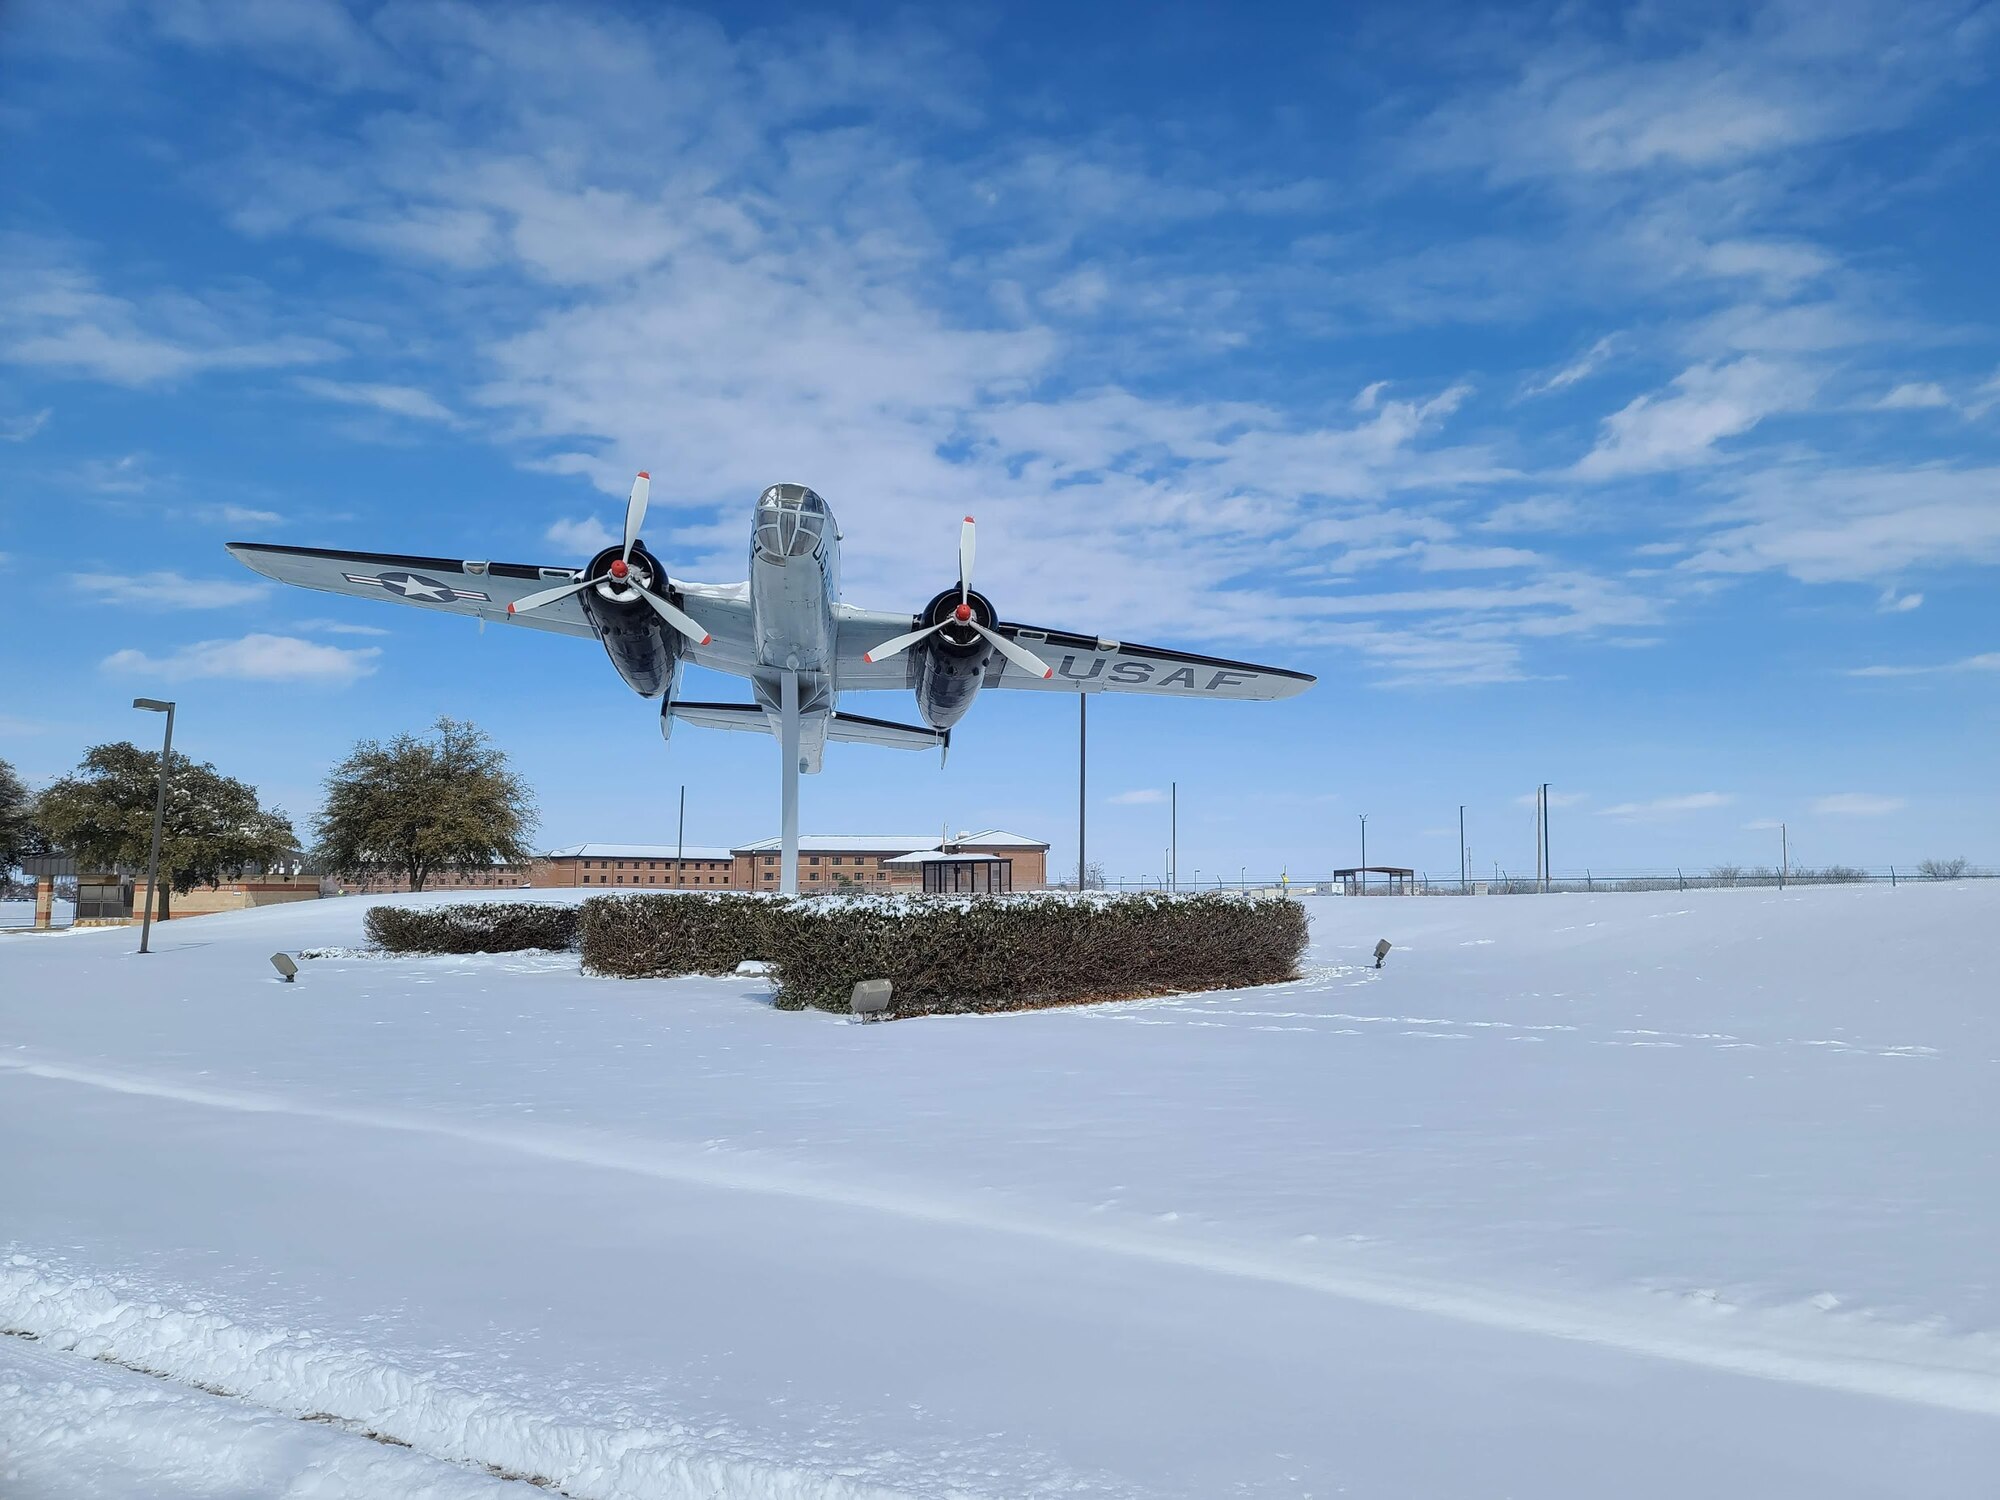 The approach in front of the Jacobson Gate to Goodfellow Air Force Base, Texas, covered in snow, Feb. 15, 2021. The base experienced freezing temperatures and heavy snowfalls in a record-breaking multi-weather phenomenon. (U.S. Air Force photo by Airman 1st Class Michael Bowman)